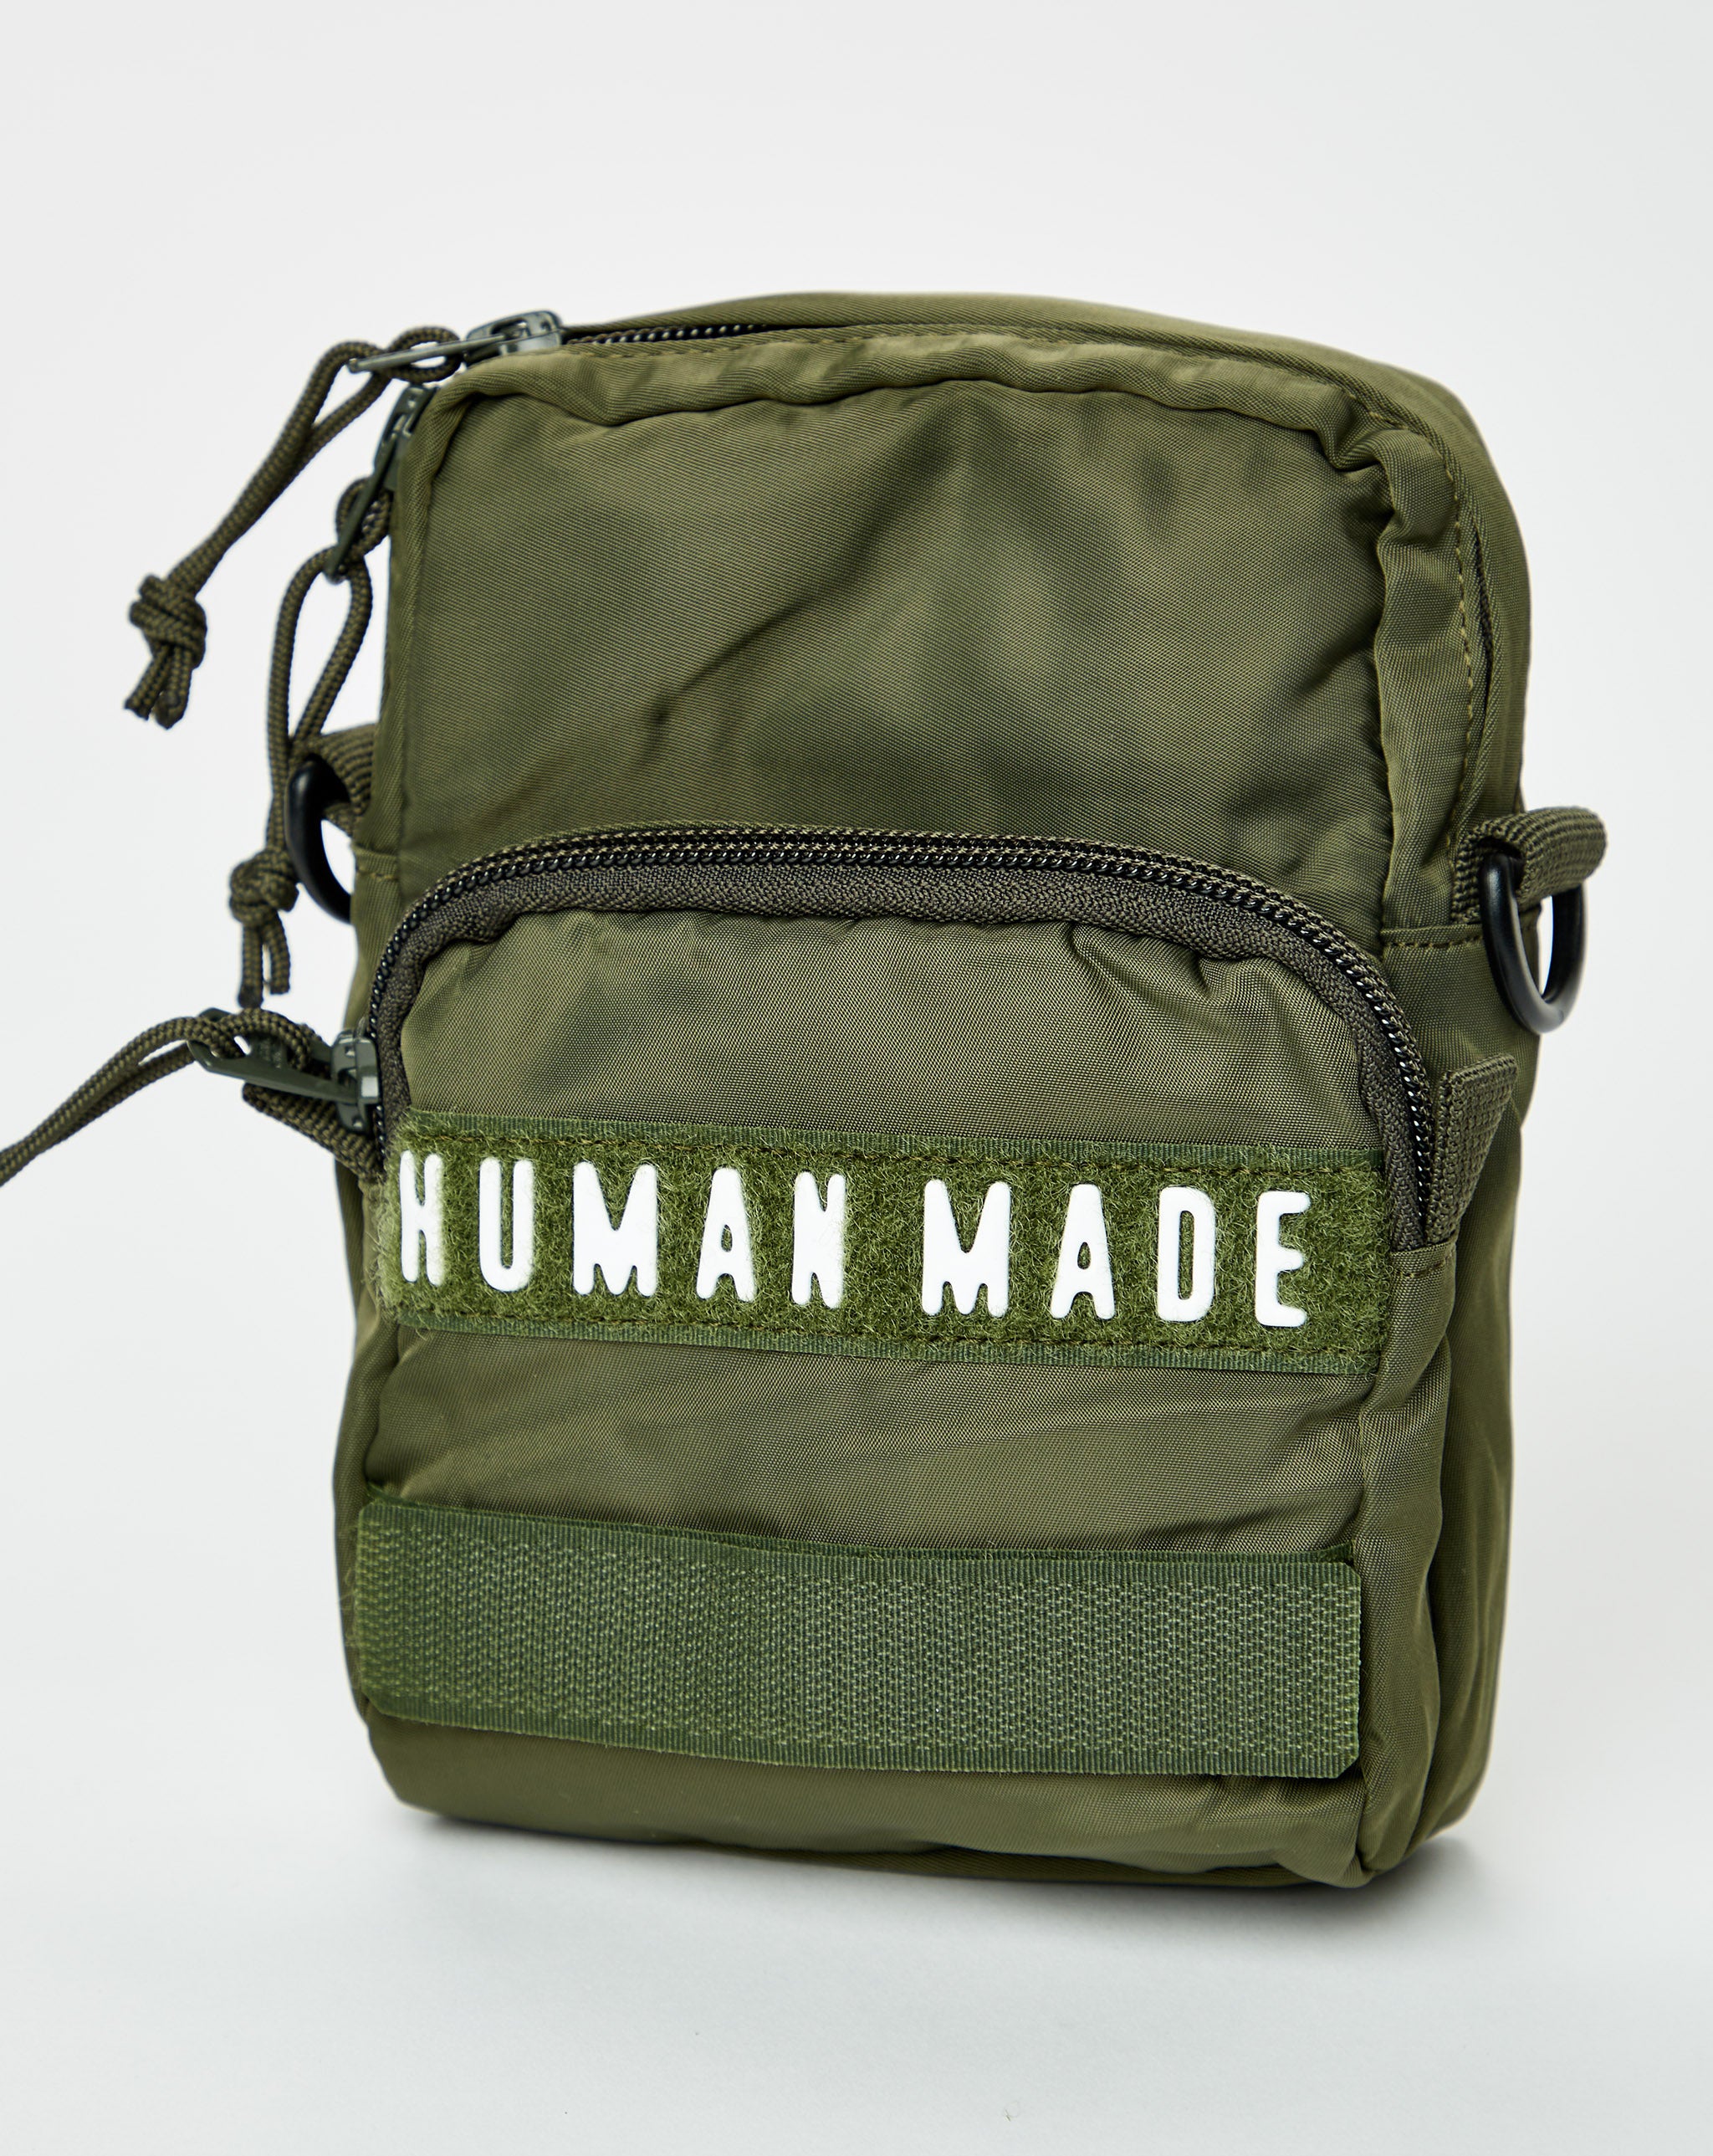 Human Made Military Pouch #2  - XHIBITION